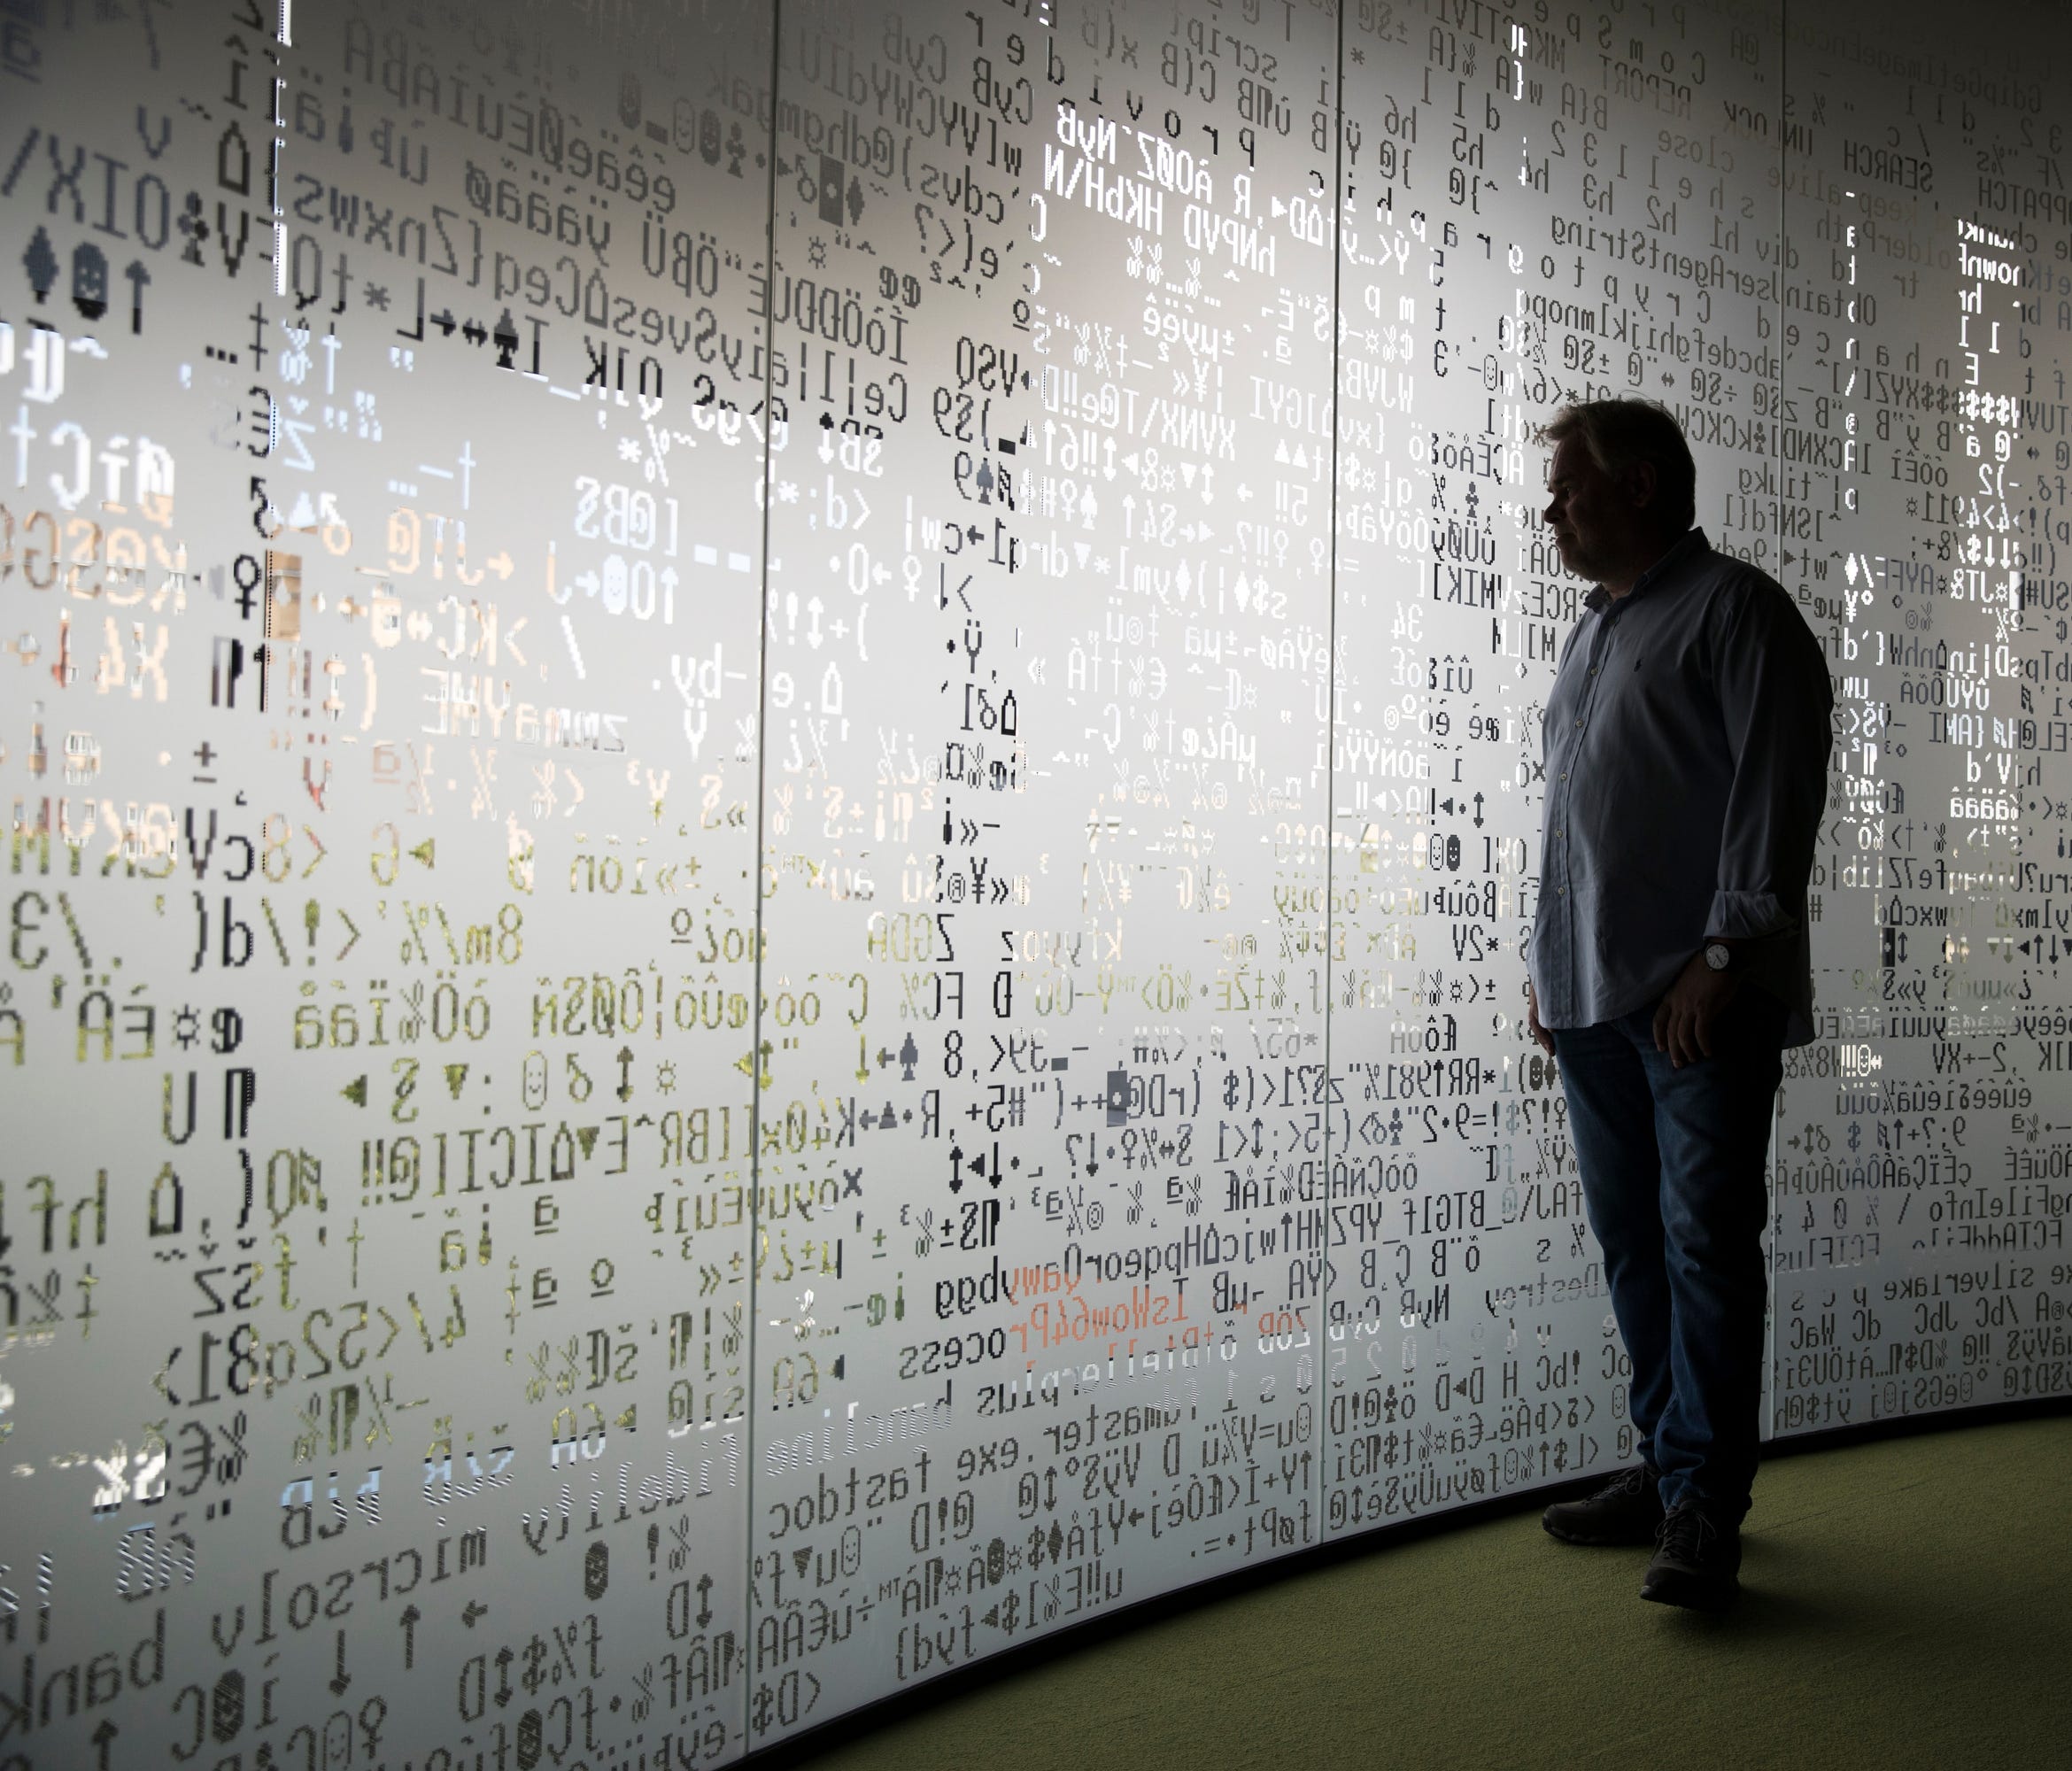 Eugene Kaspersky, Russian antivirus programs developer and chief executive of Russia's Kaspersky Lab, watches trough a window decorated with programming code's symbols at his company's headquarters in Moscow, Russia, Saturday, July 1, 2017. Kaspersky